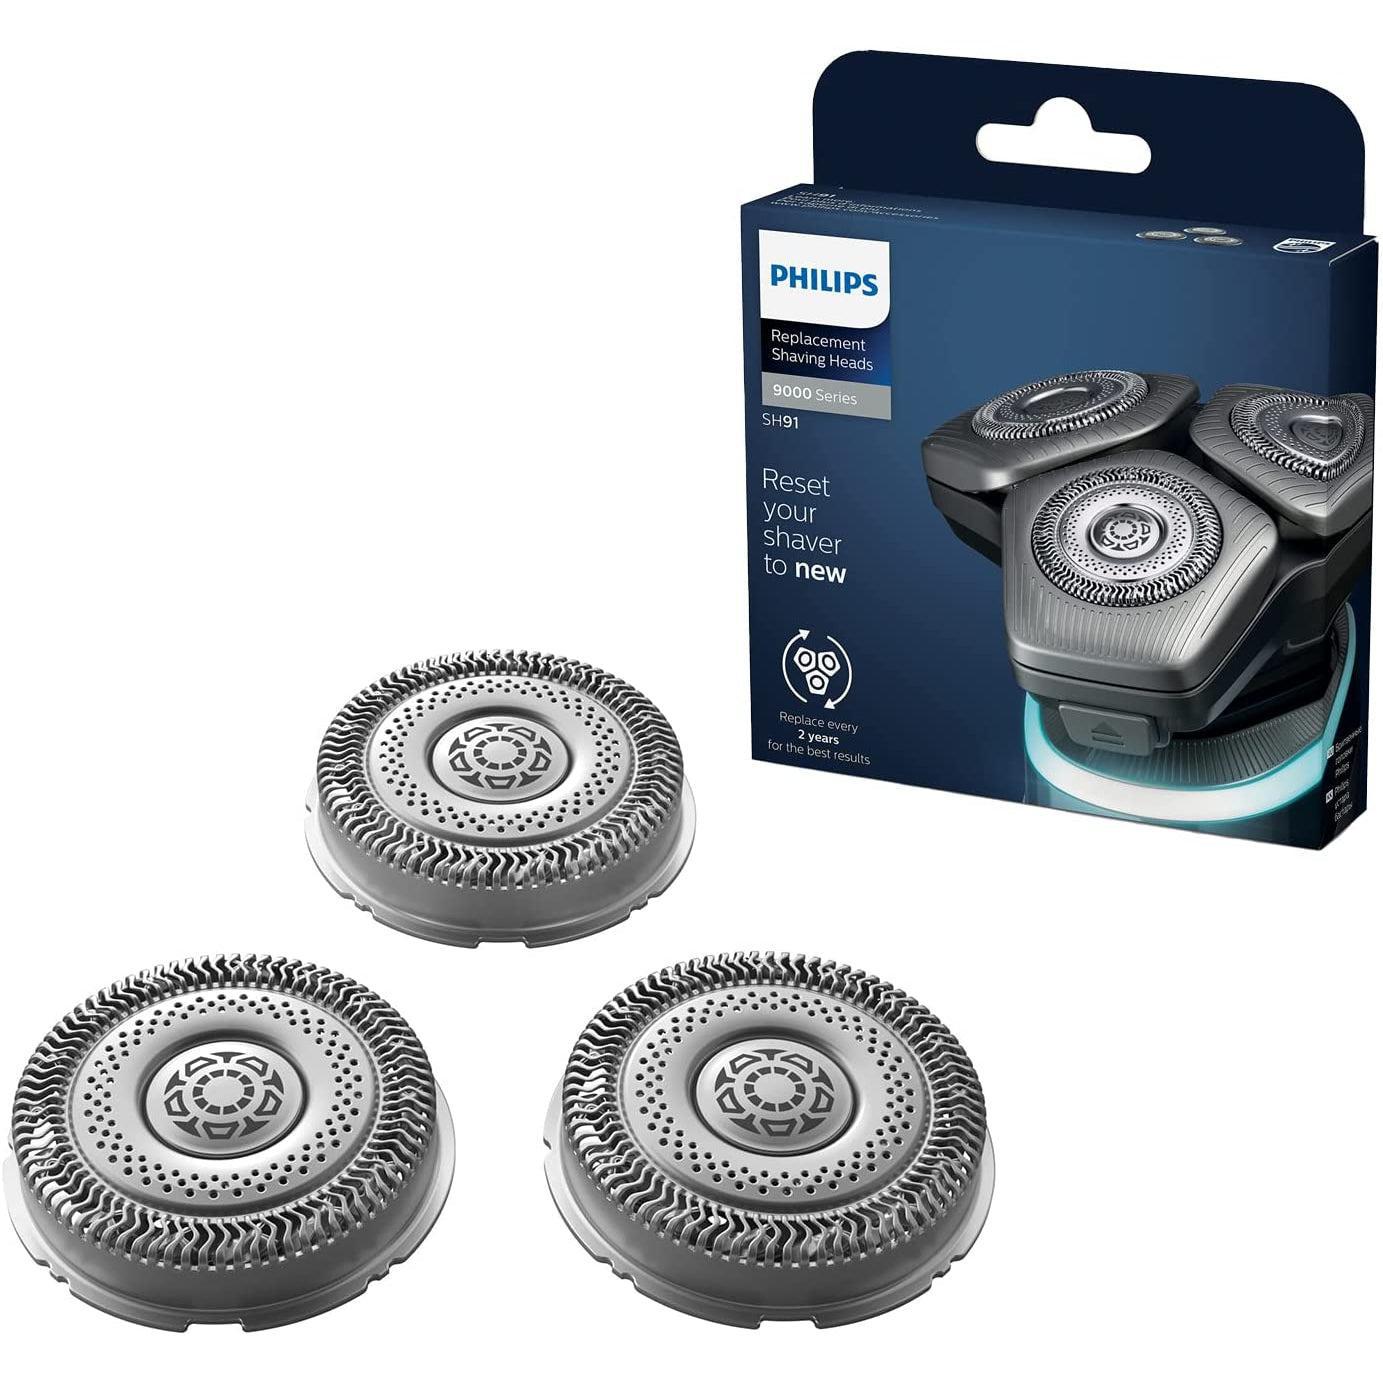 Philips SH91/50 Shaver Series 9000 Replacement Shaving Heads - Fits Philips S9000 (S9xxx) - Healthxpress.ie